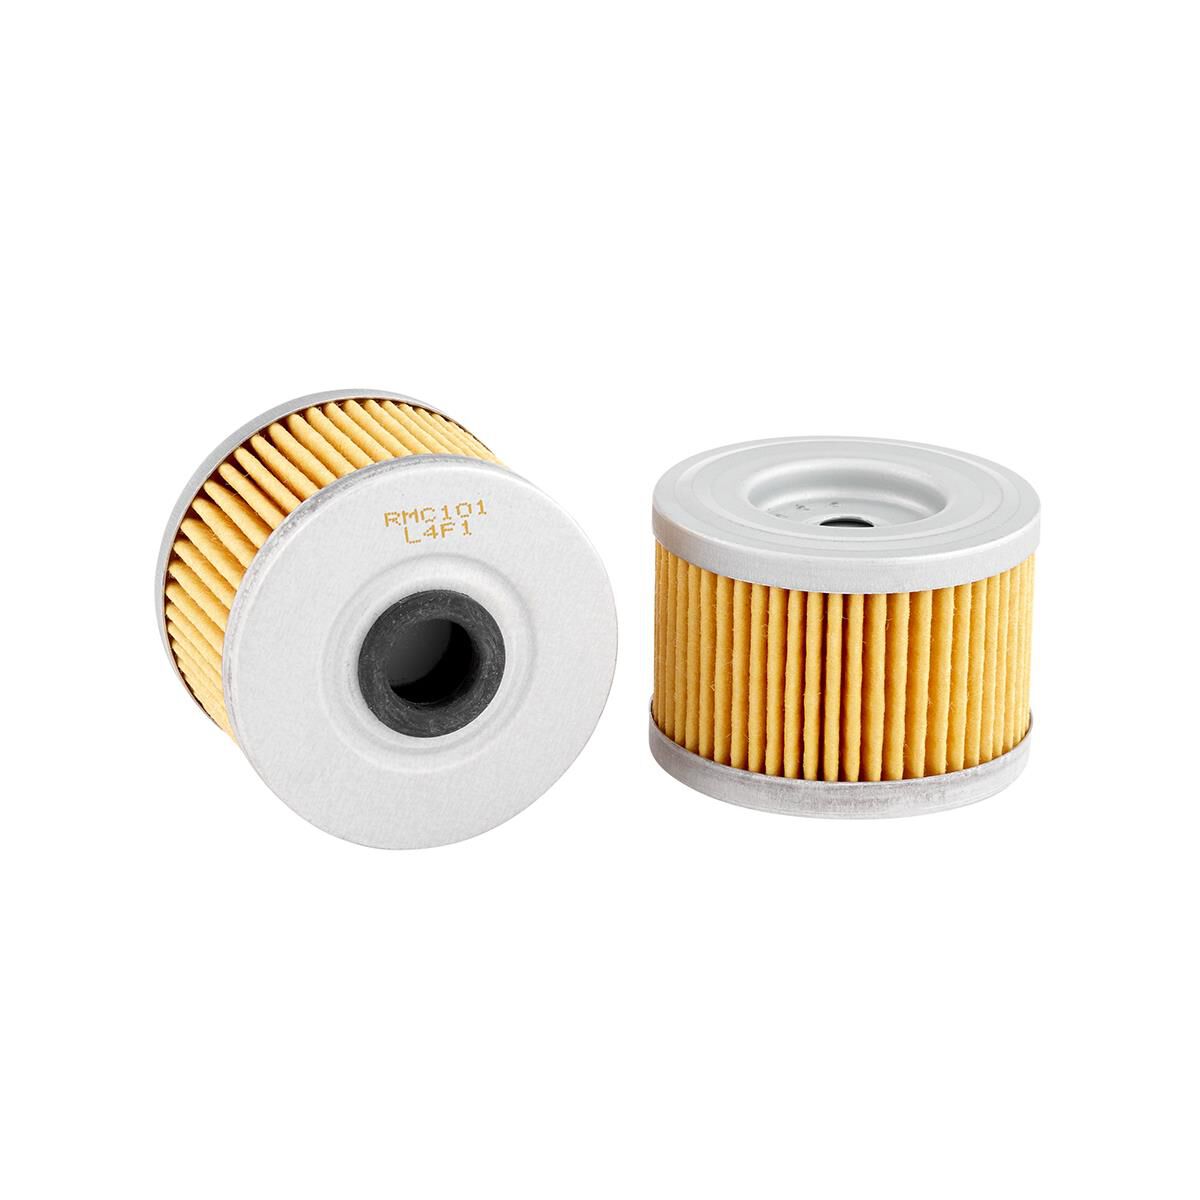 RYCO MOTORCYCLE OIL FILTER - RMC101, , scaau_hi-res